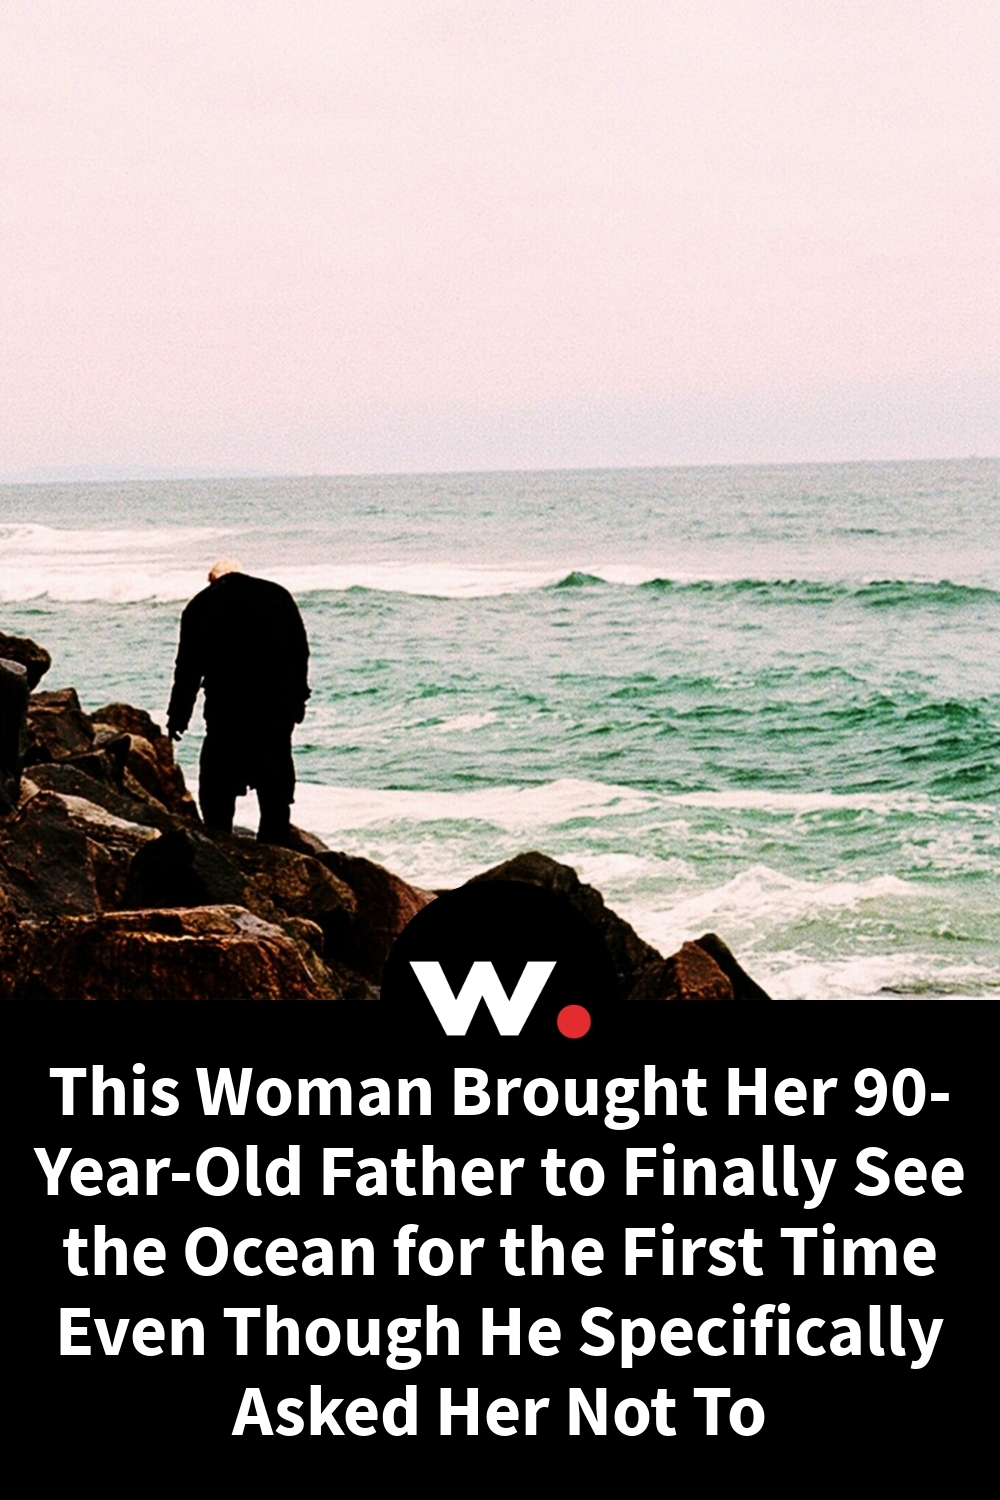 This Woman Brought Her 90-Year-Old Father to Finally See the Ocean for the First Time Even Though He Specifically Asked Her Not To